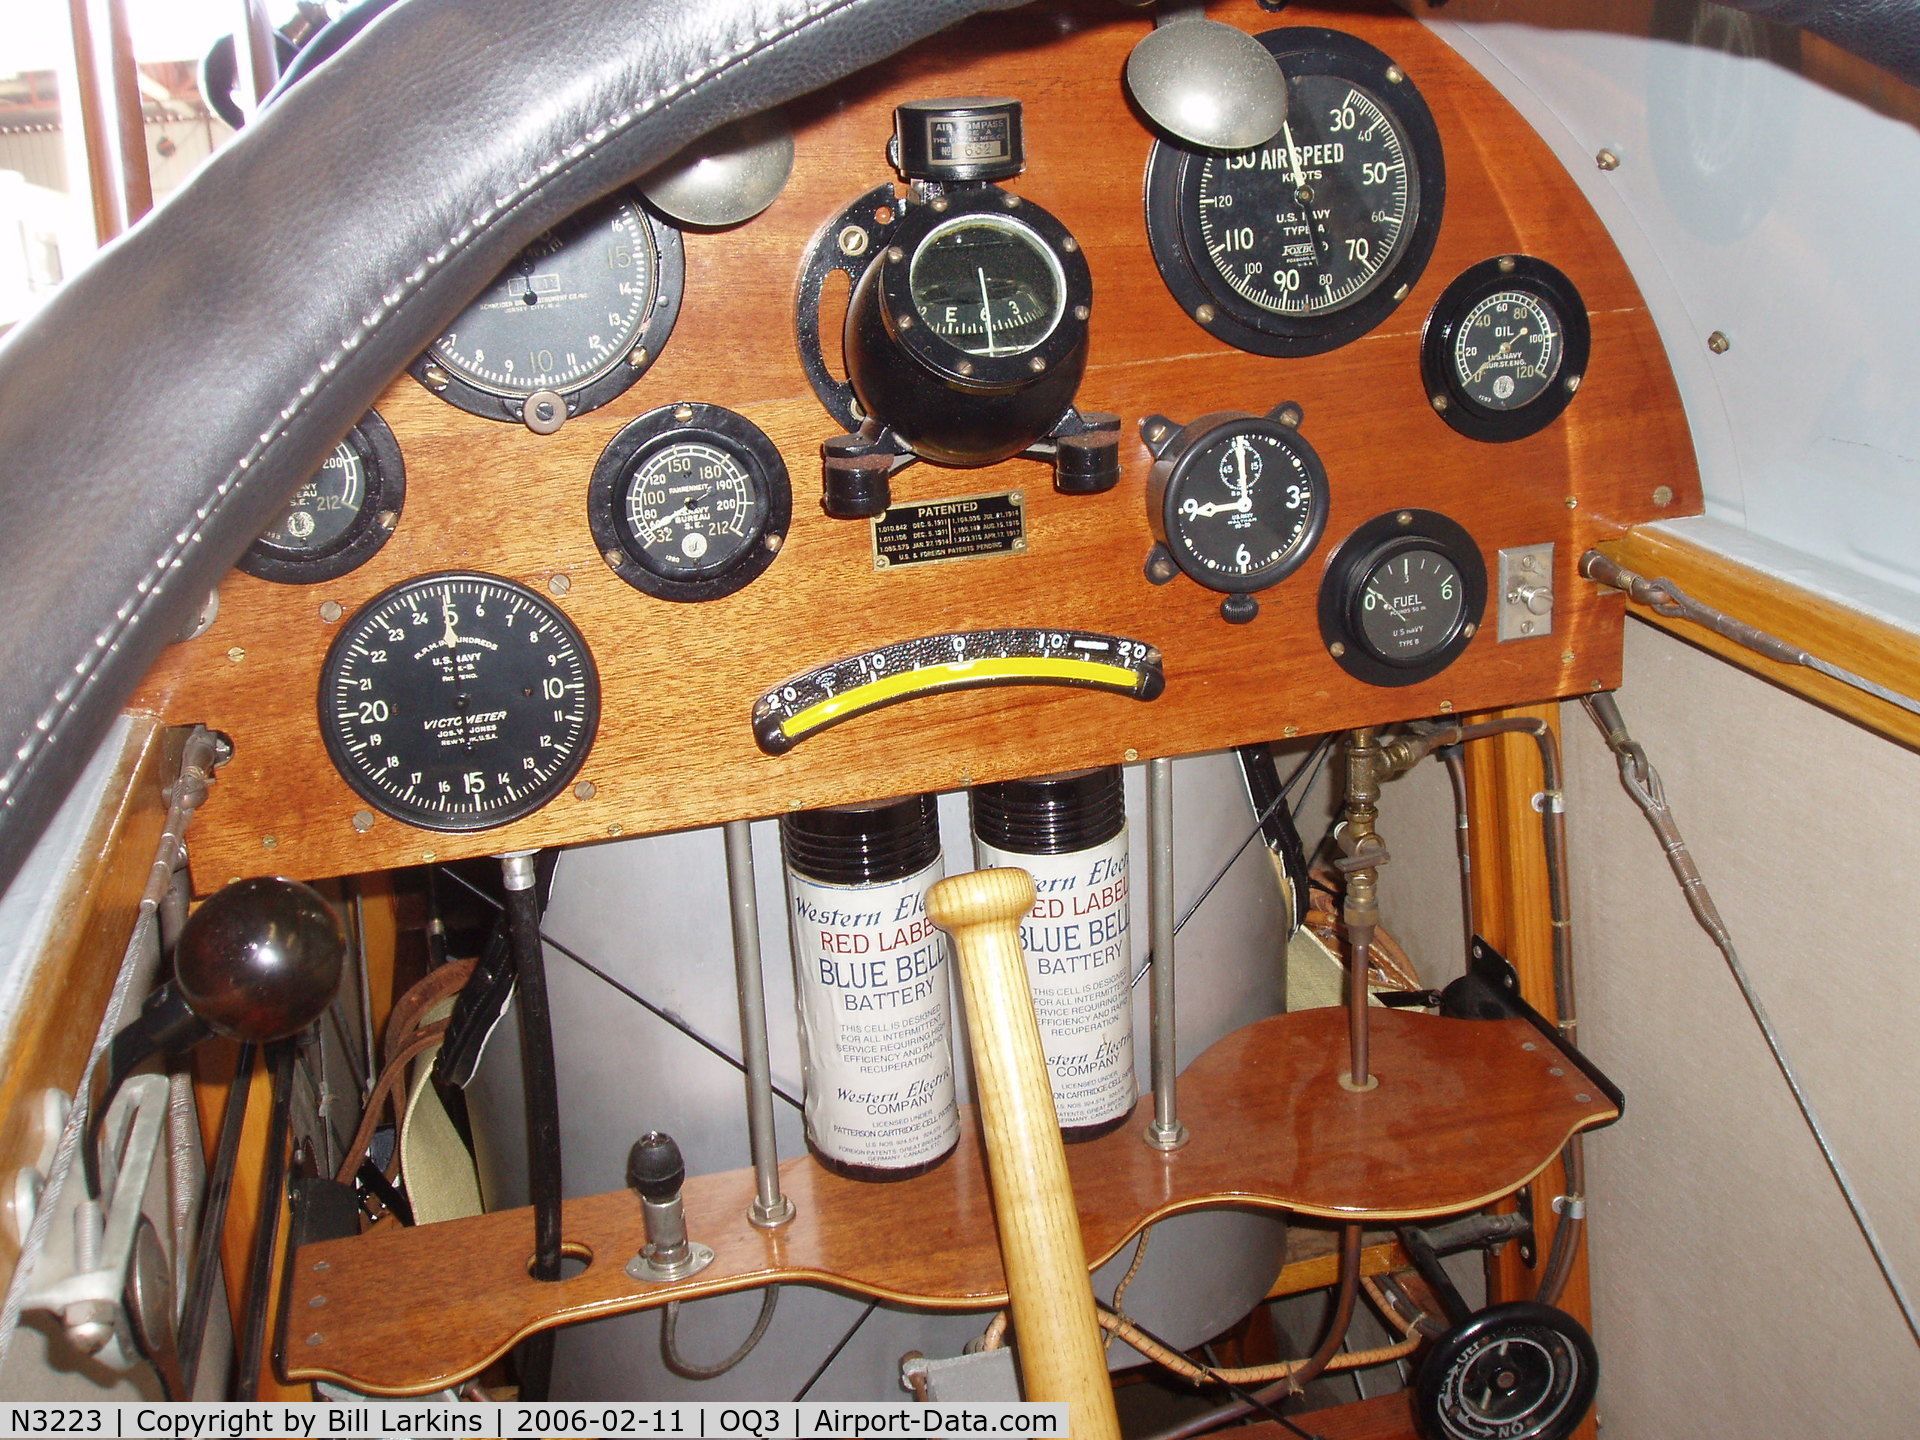 Naval Aircraft Instrument Panels In 1916! - Patriots Point News & Events